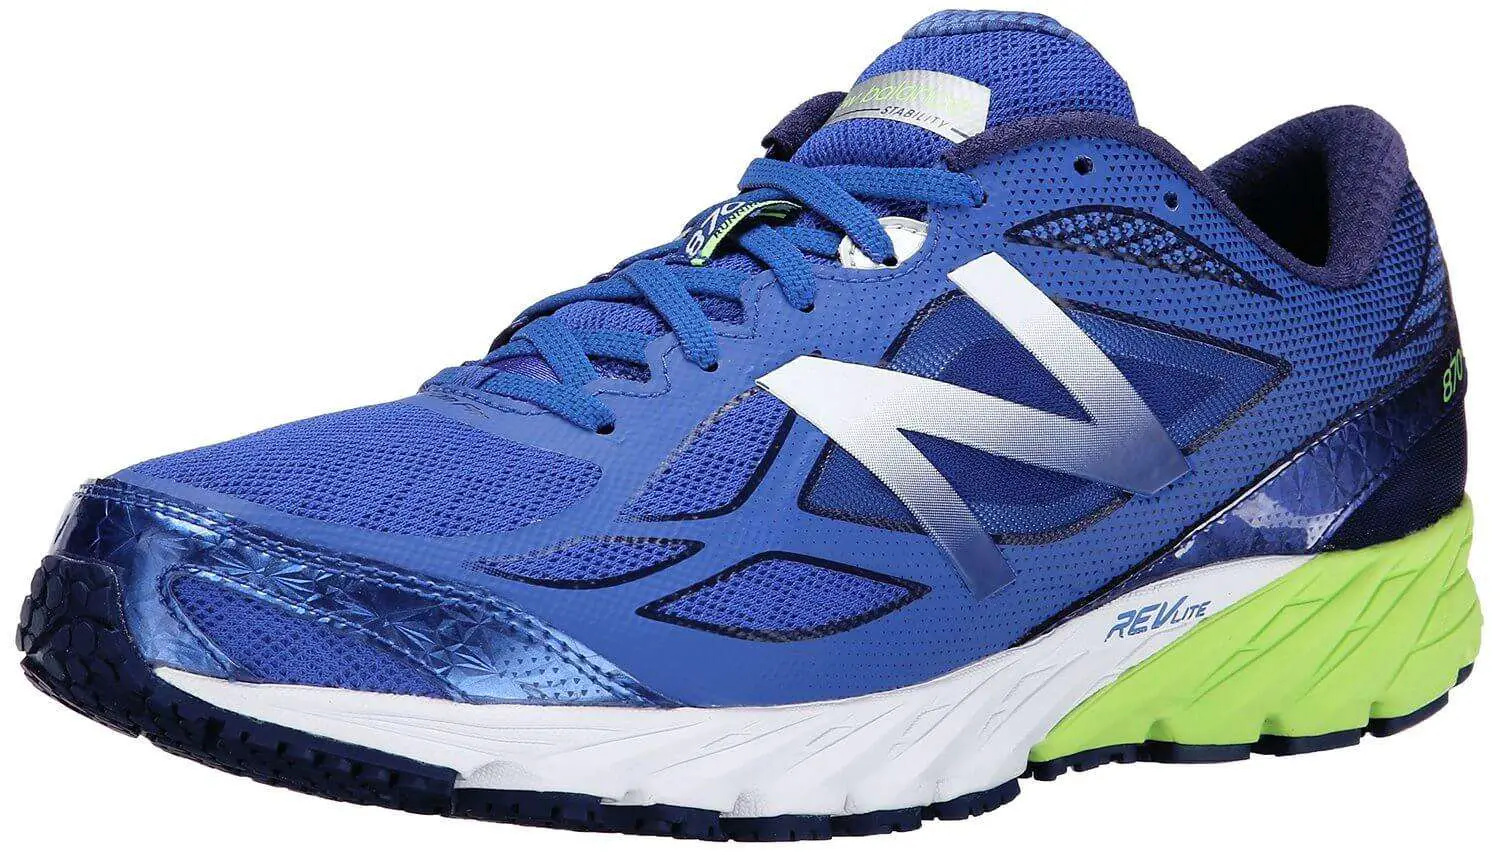 10 Best New Balance Running Shoes Reviewed in 2018 ...